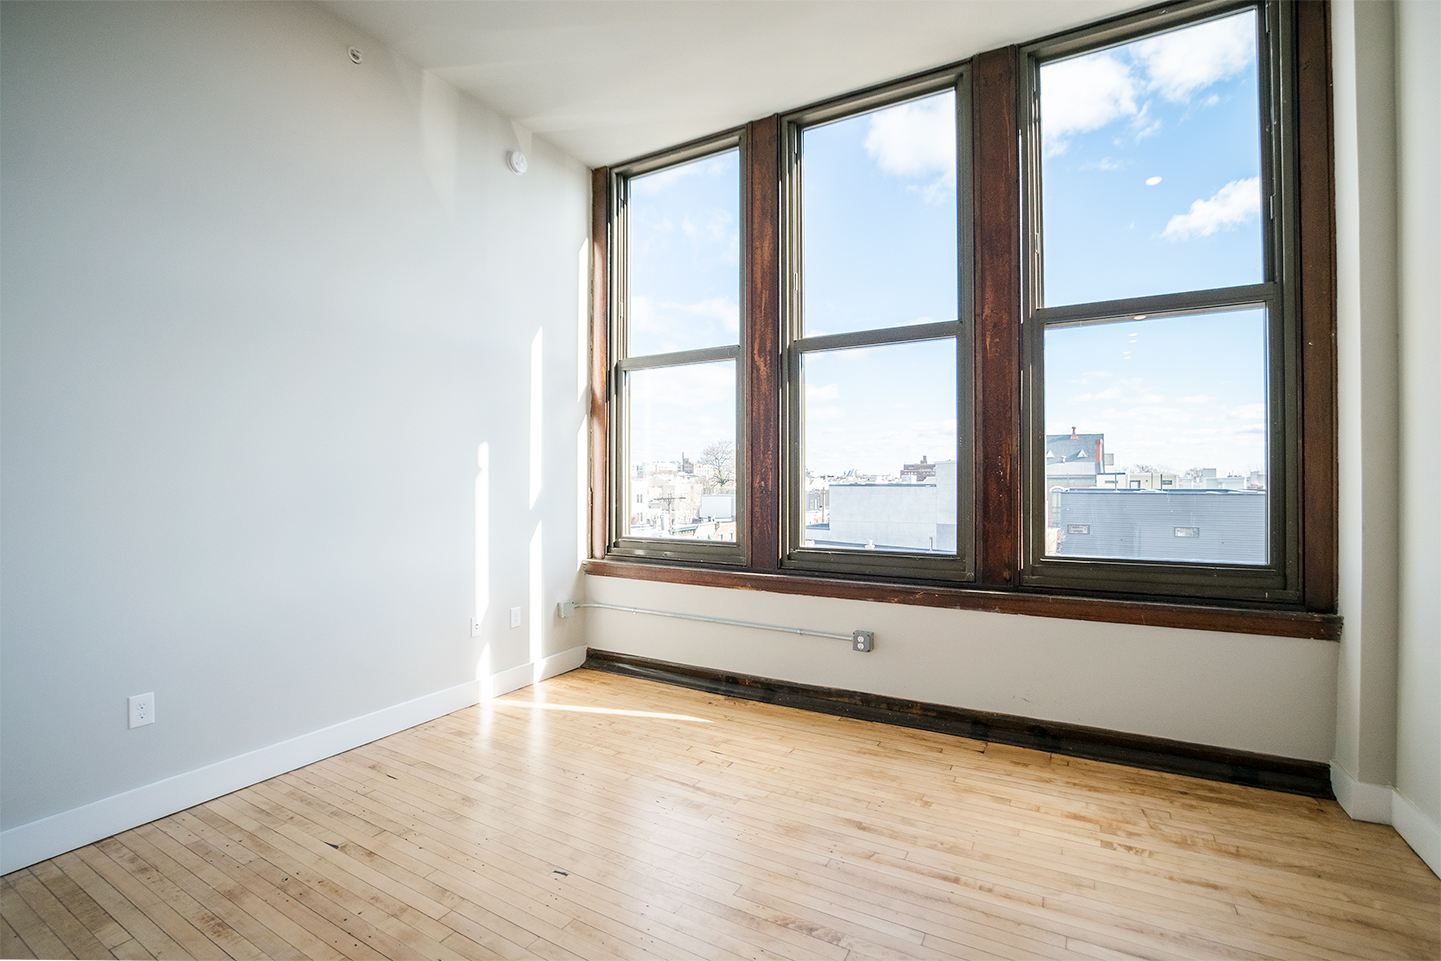 Property Photo For 1300 S. 19th St, Unit 210